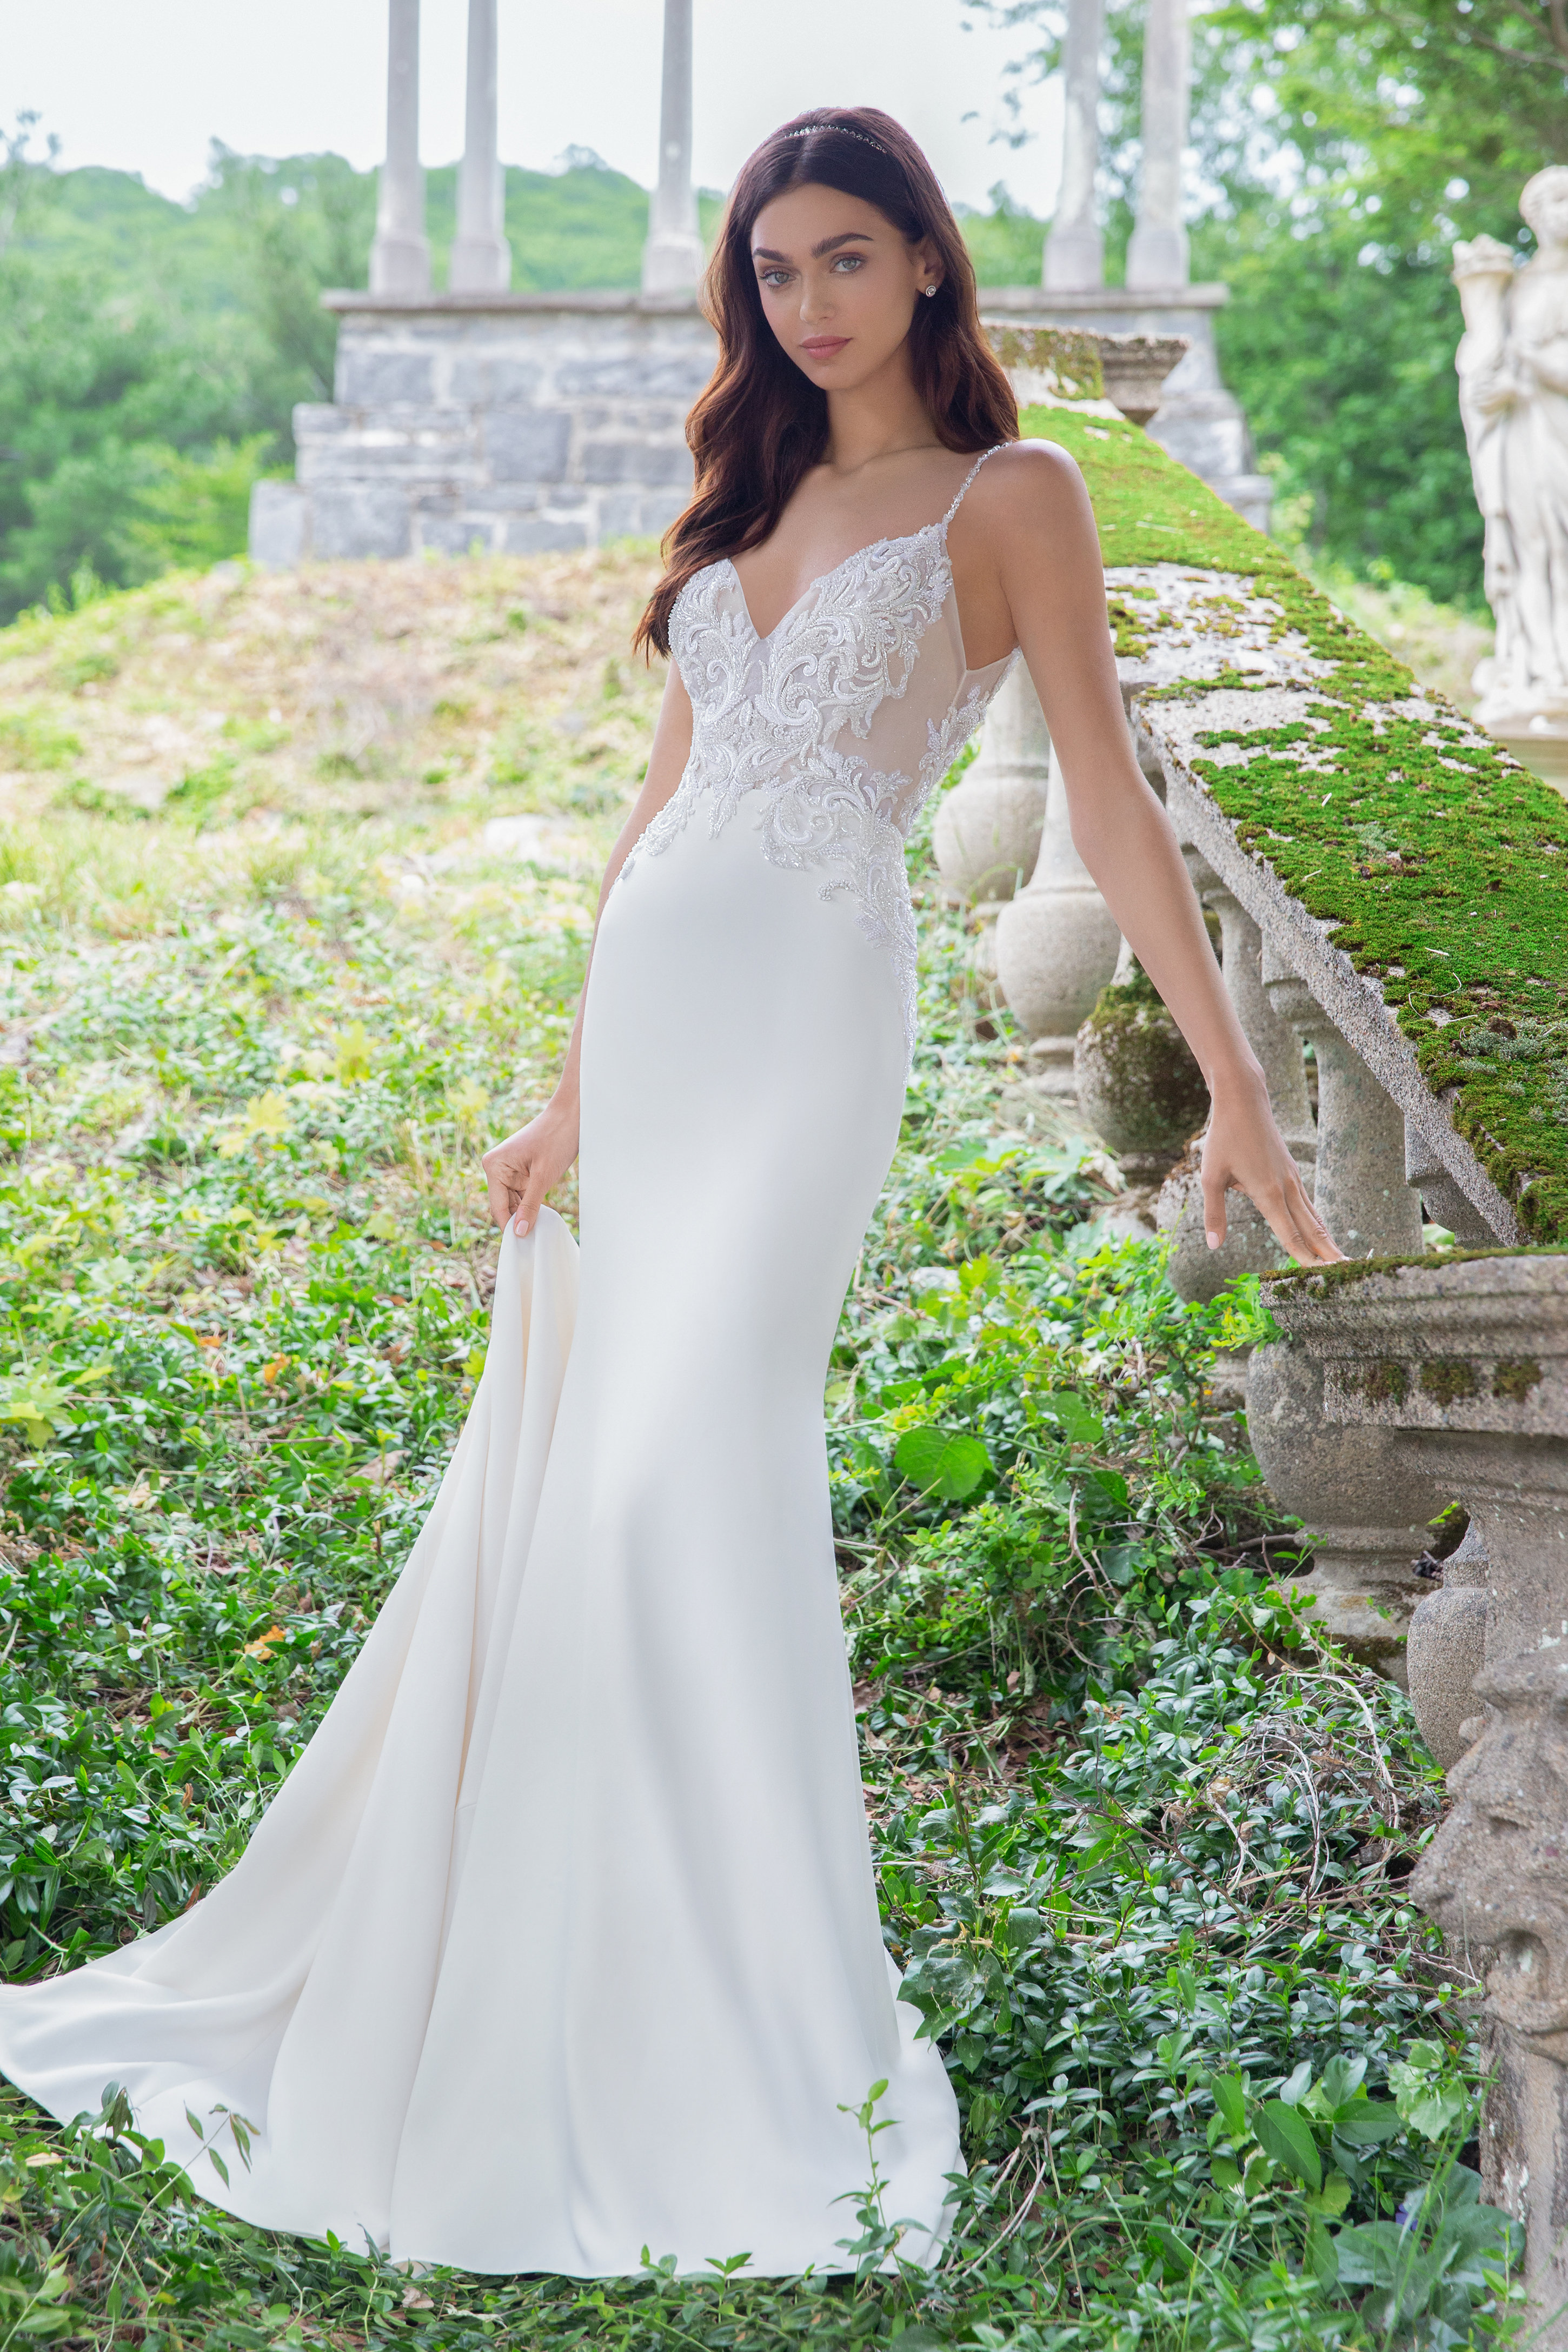 Bridal Gowns and Wedding Dresses by JLM Couture - Style ...